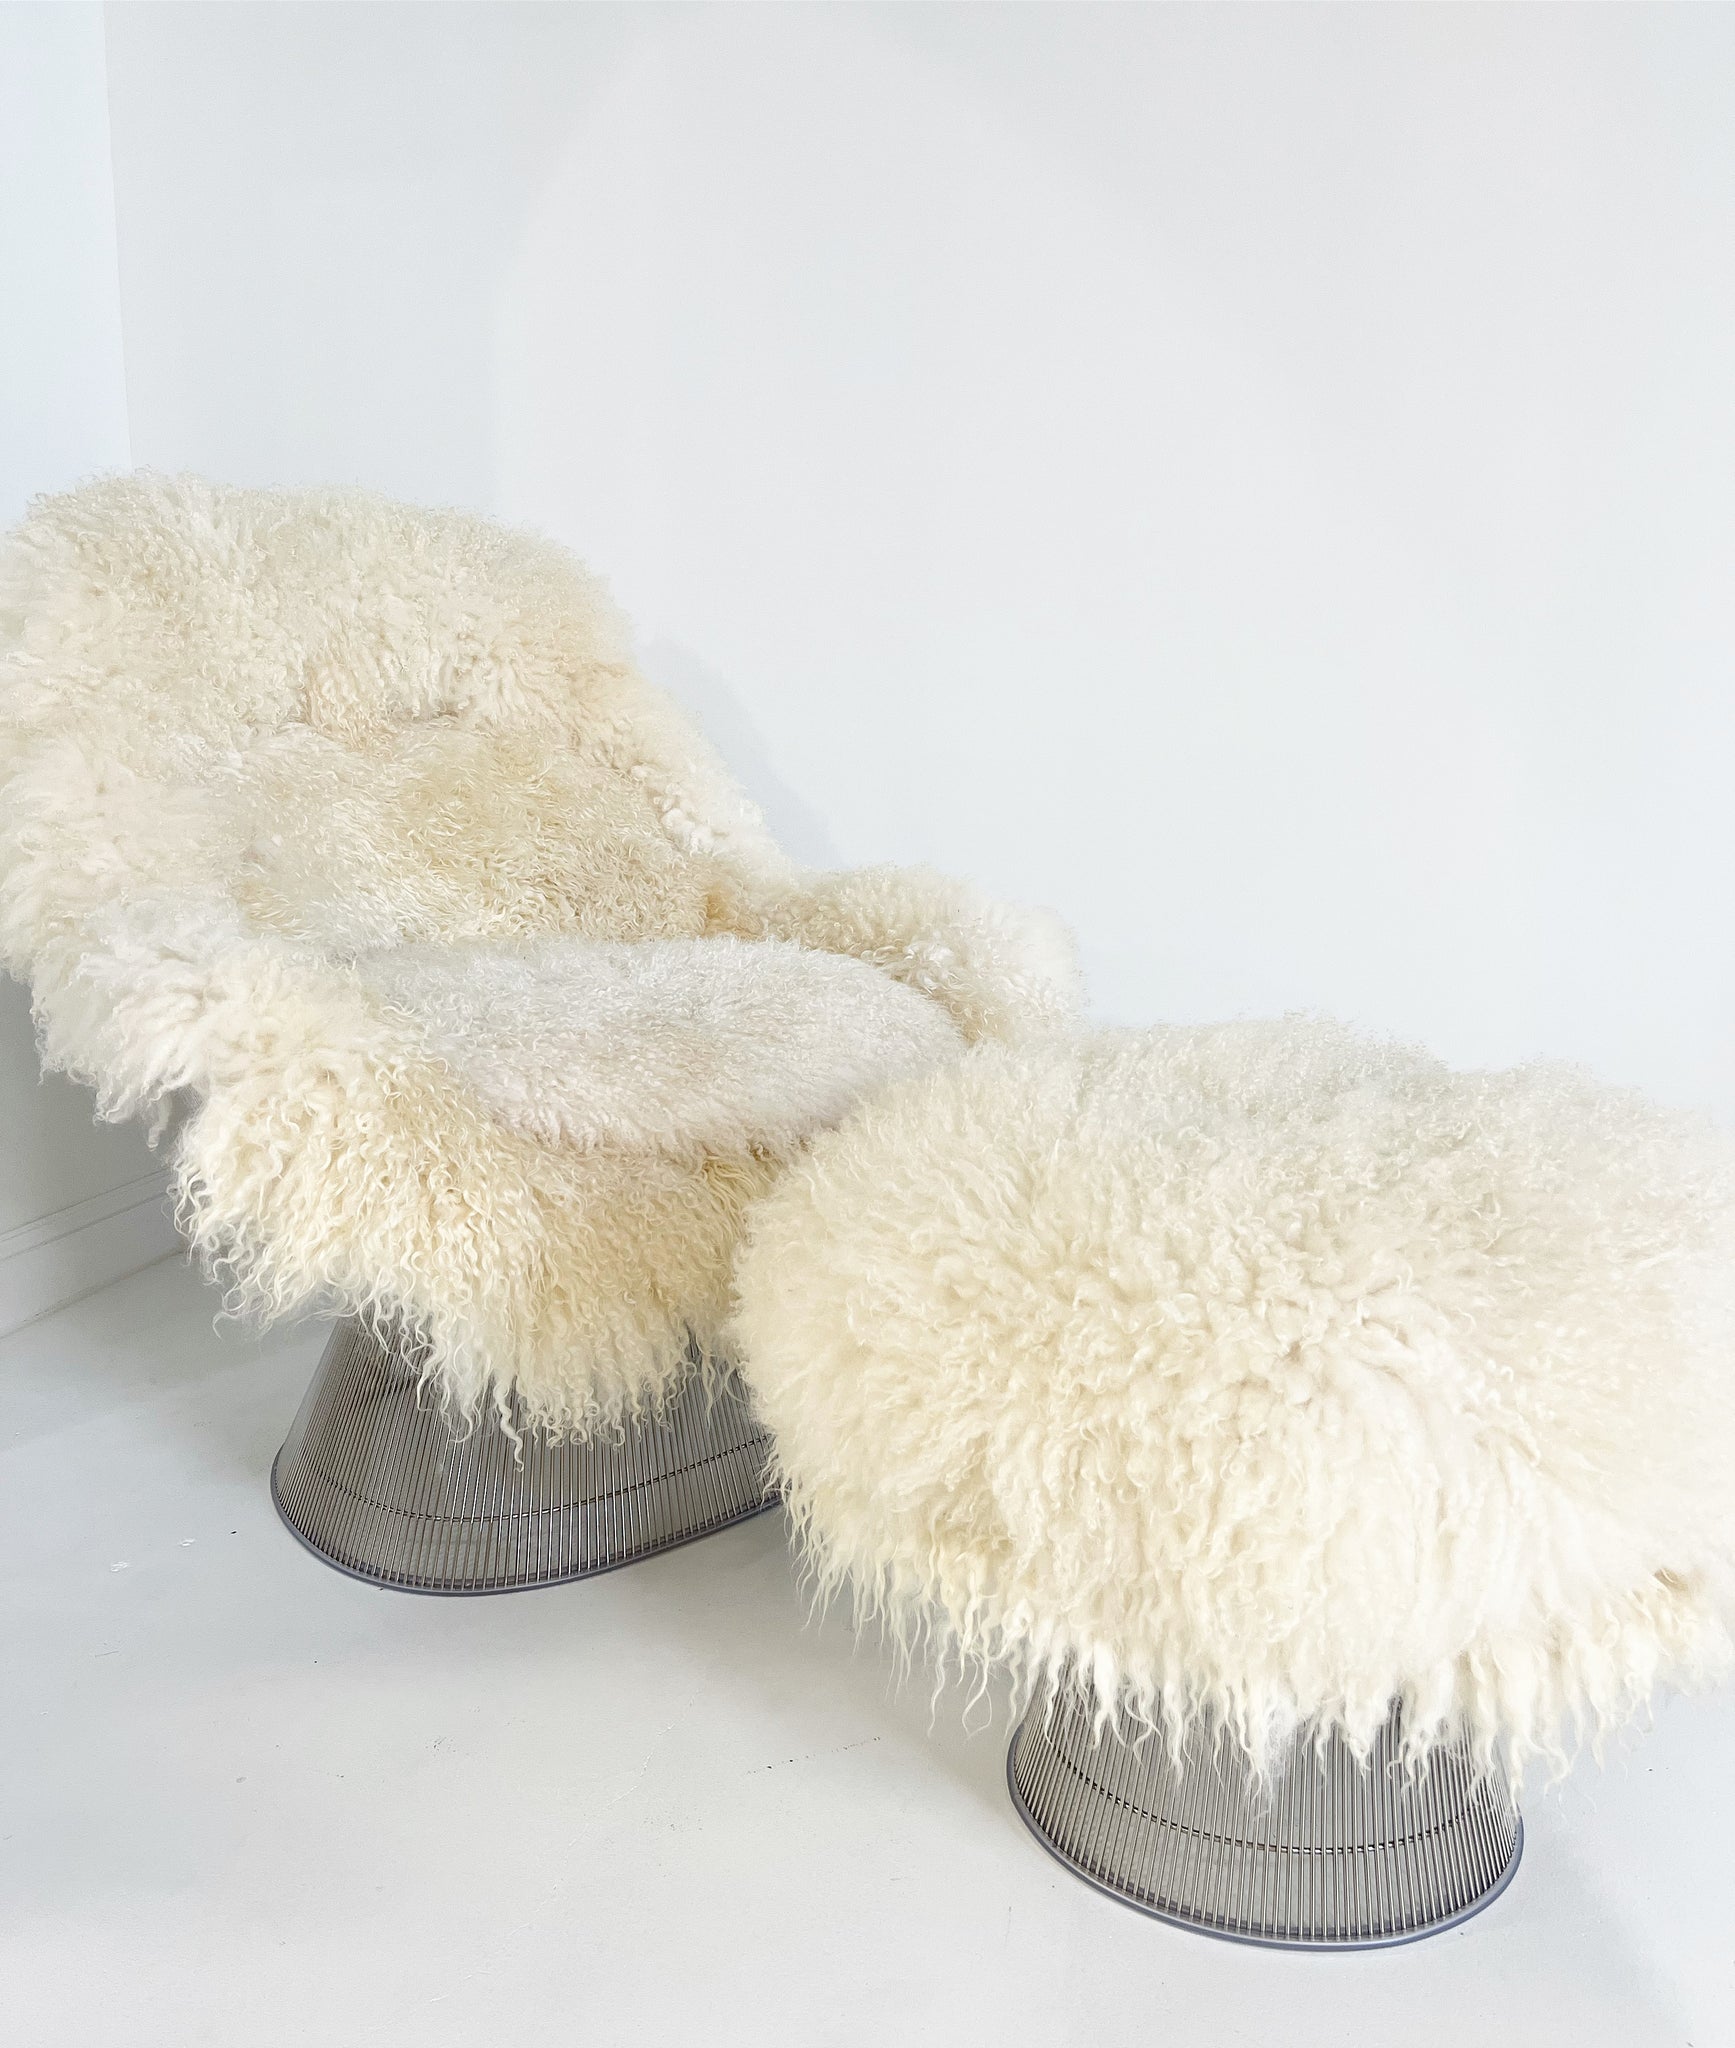 ON HOLD Easy Chair and Ottoman in Gotland Sheepskin and Leather